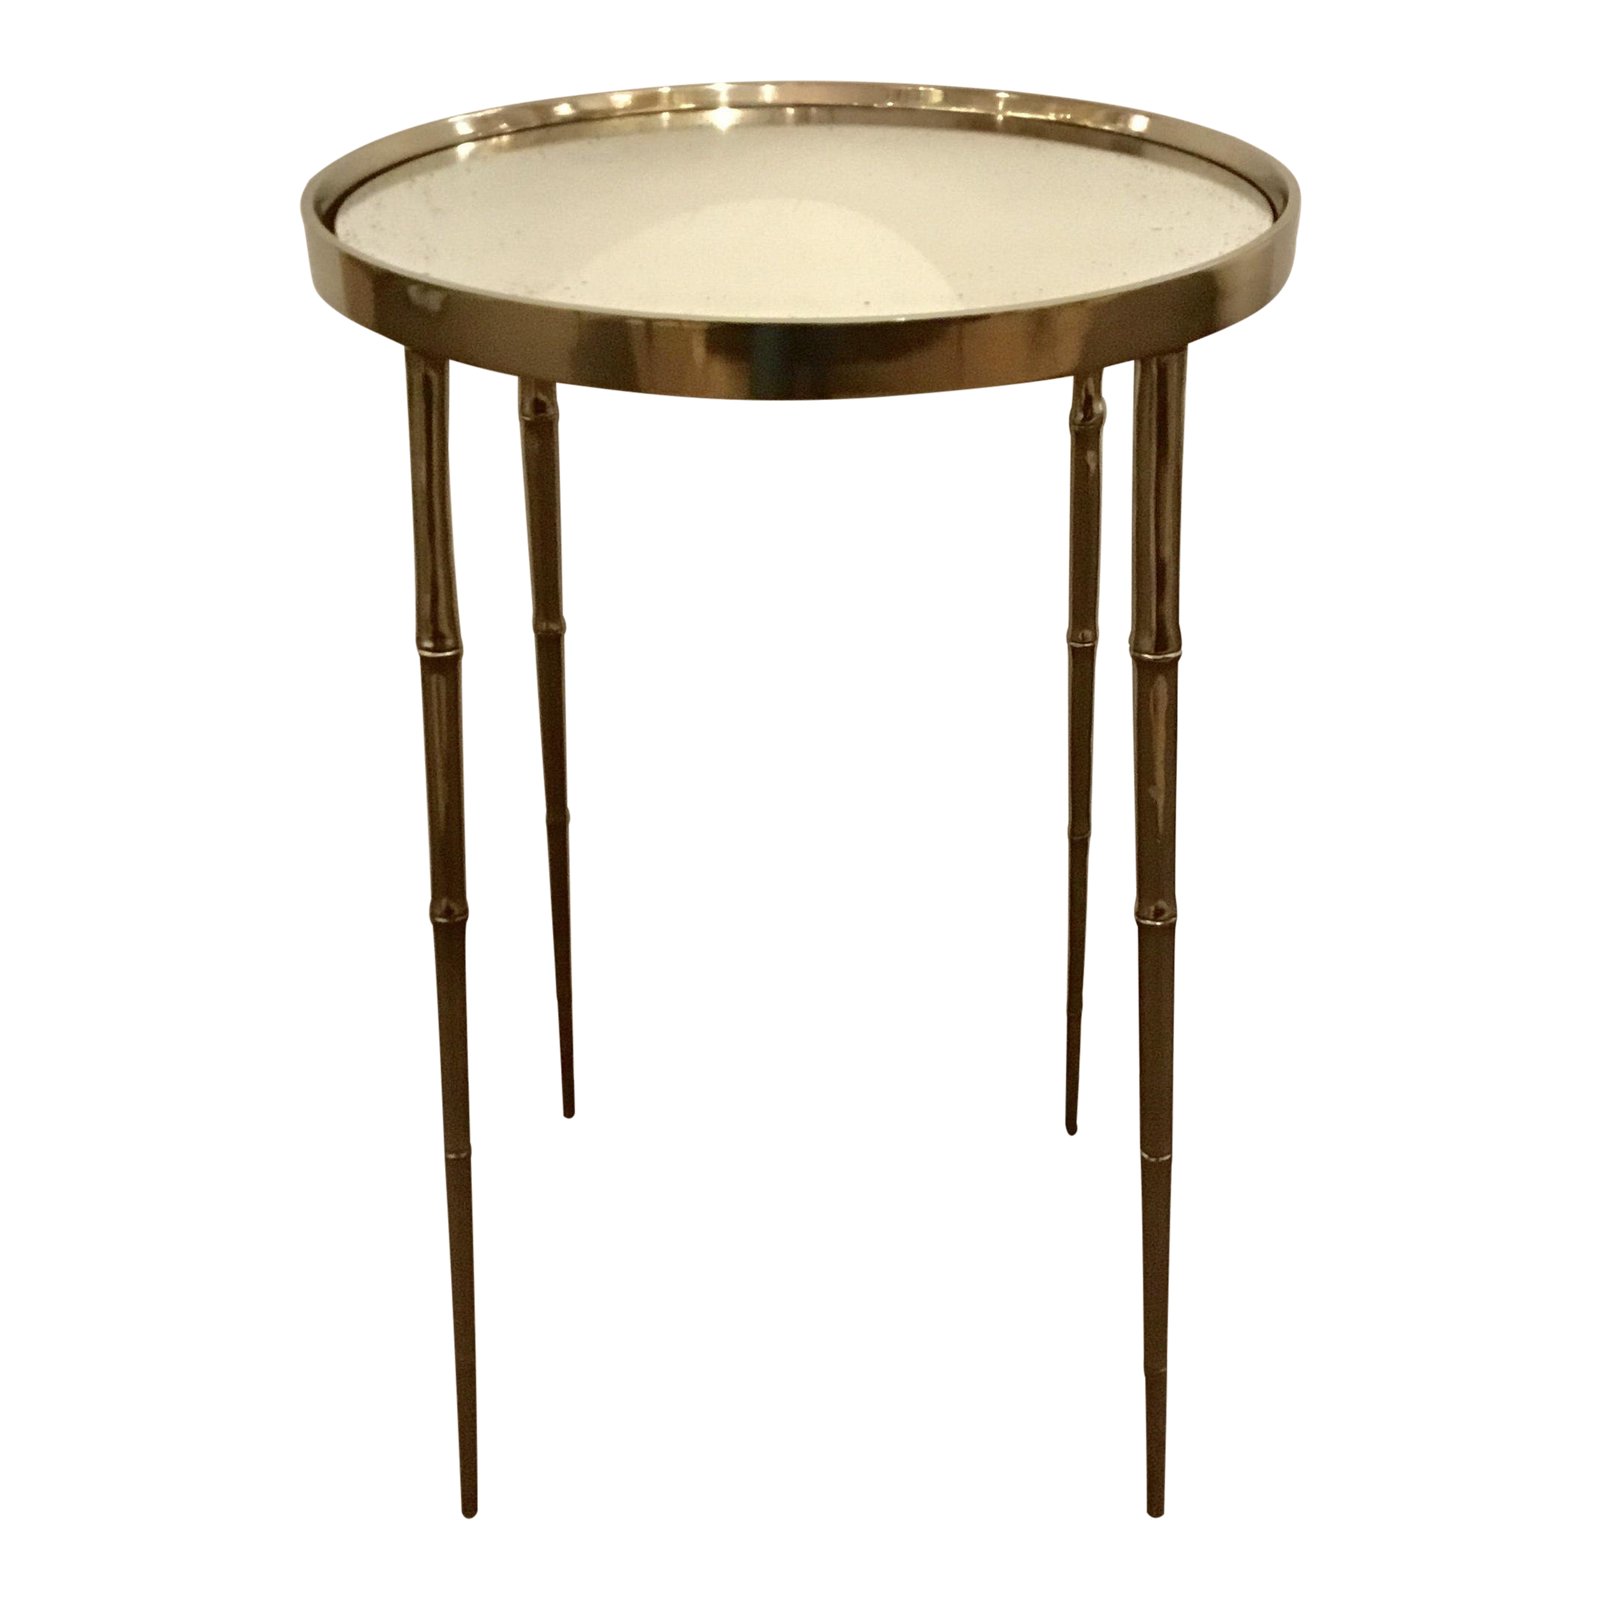 barbar barry for henredon asian modern silver coco accent table outdoor tables chairish bunnings garden seat bedroom design dale tiffany dragonfly lily lamp furniture corner bench